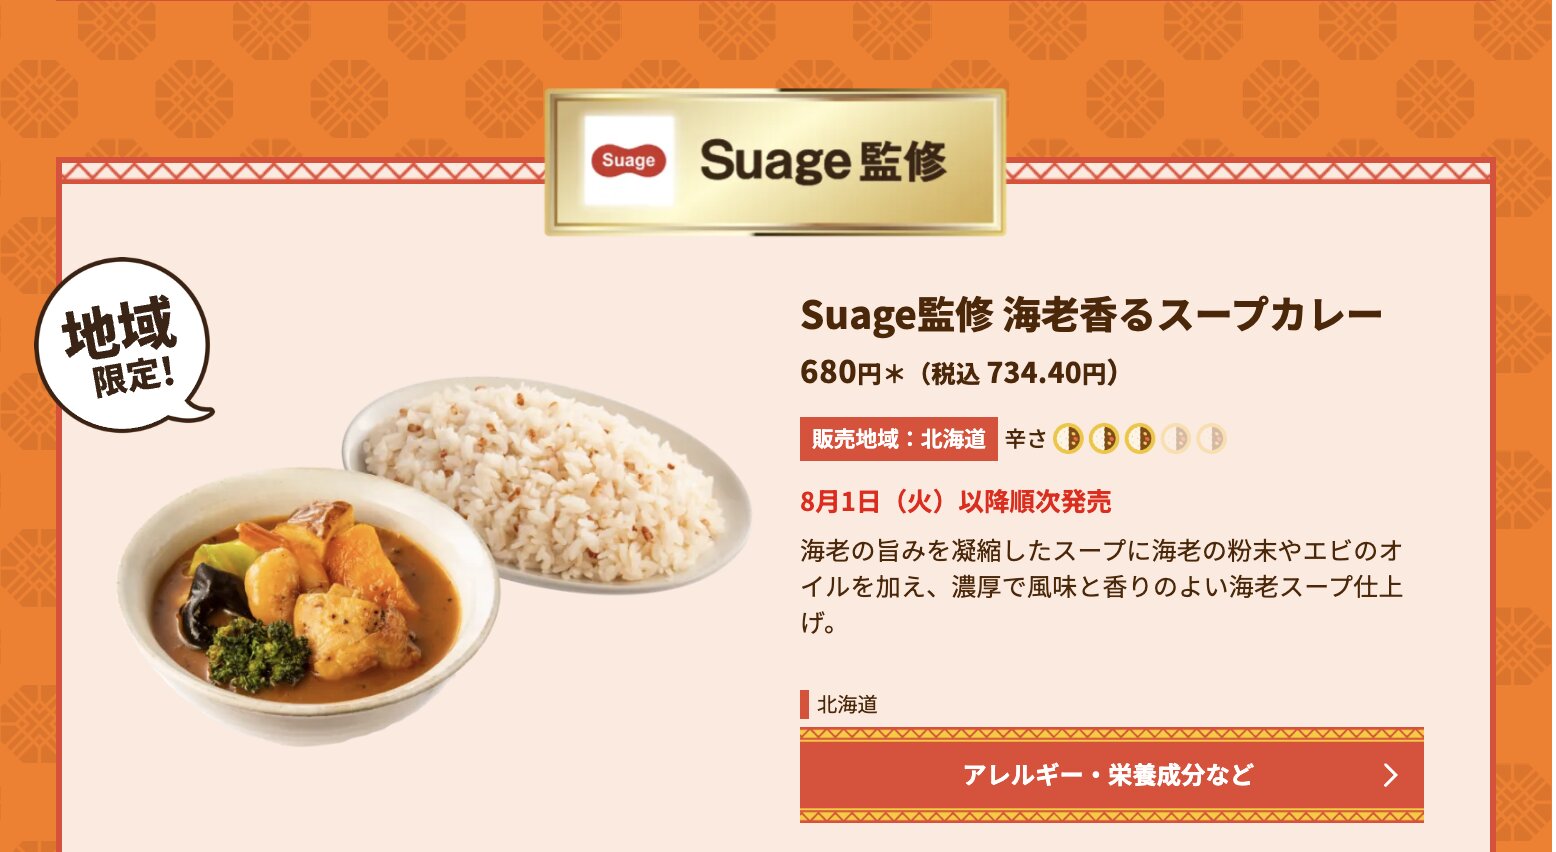 https://www.sej.co.jp/products/curry2308.html